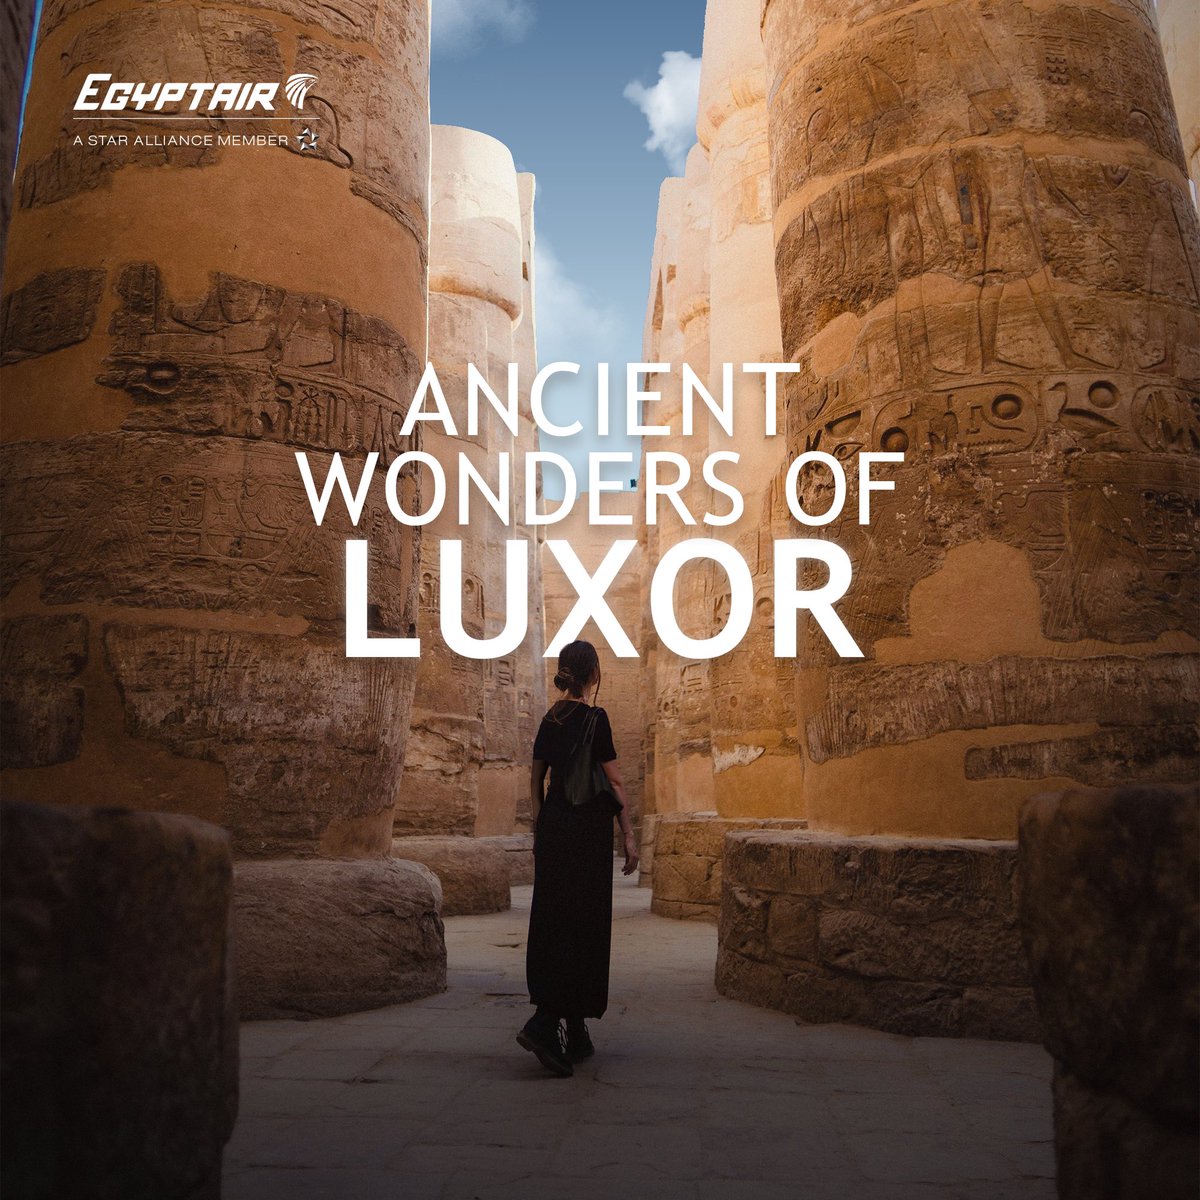 Journey back in time to the ancient wonders of Luxor with #EGYPTAIR! Explore majestic temples, royal tombs, and timeless treasures along the Nile. Book your historic adventure: egyptair.com.